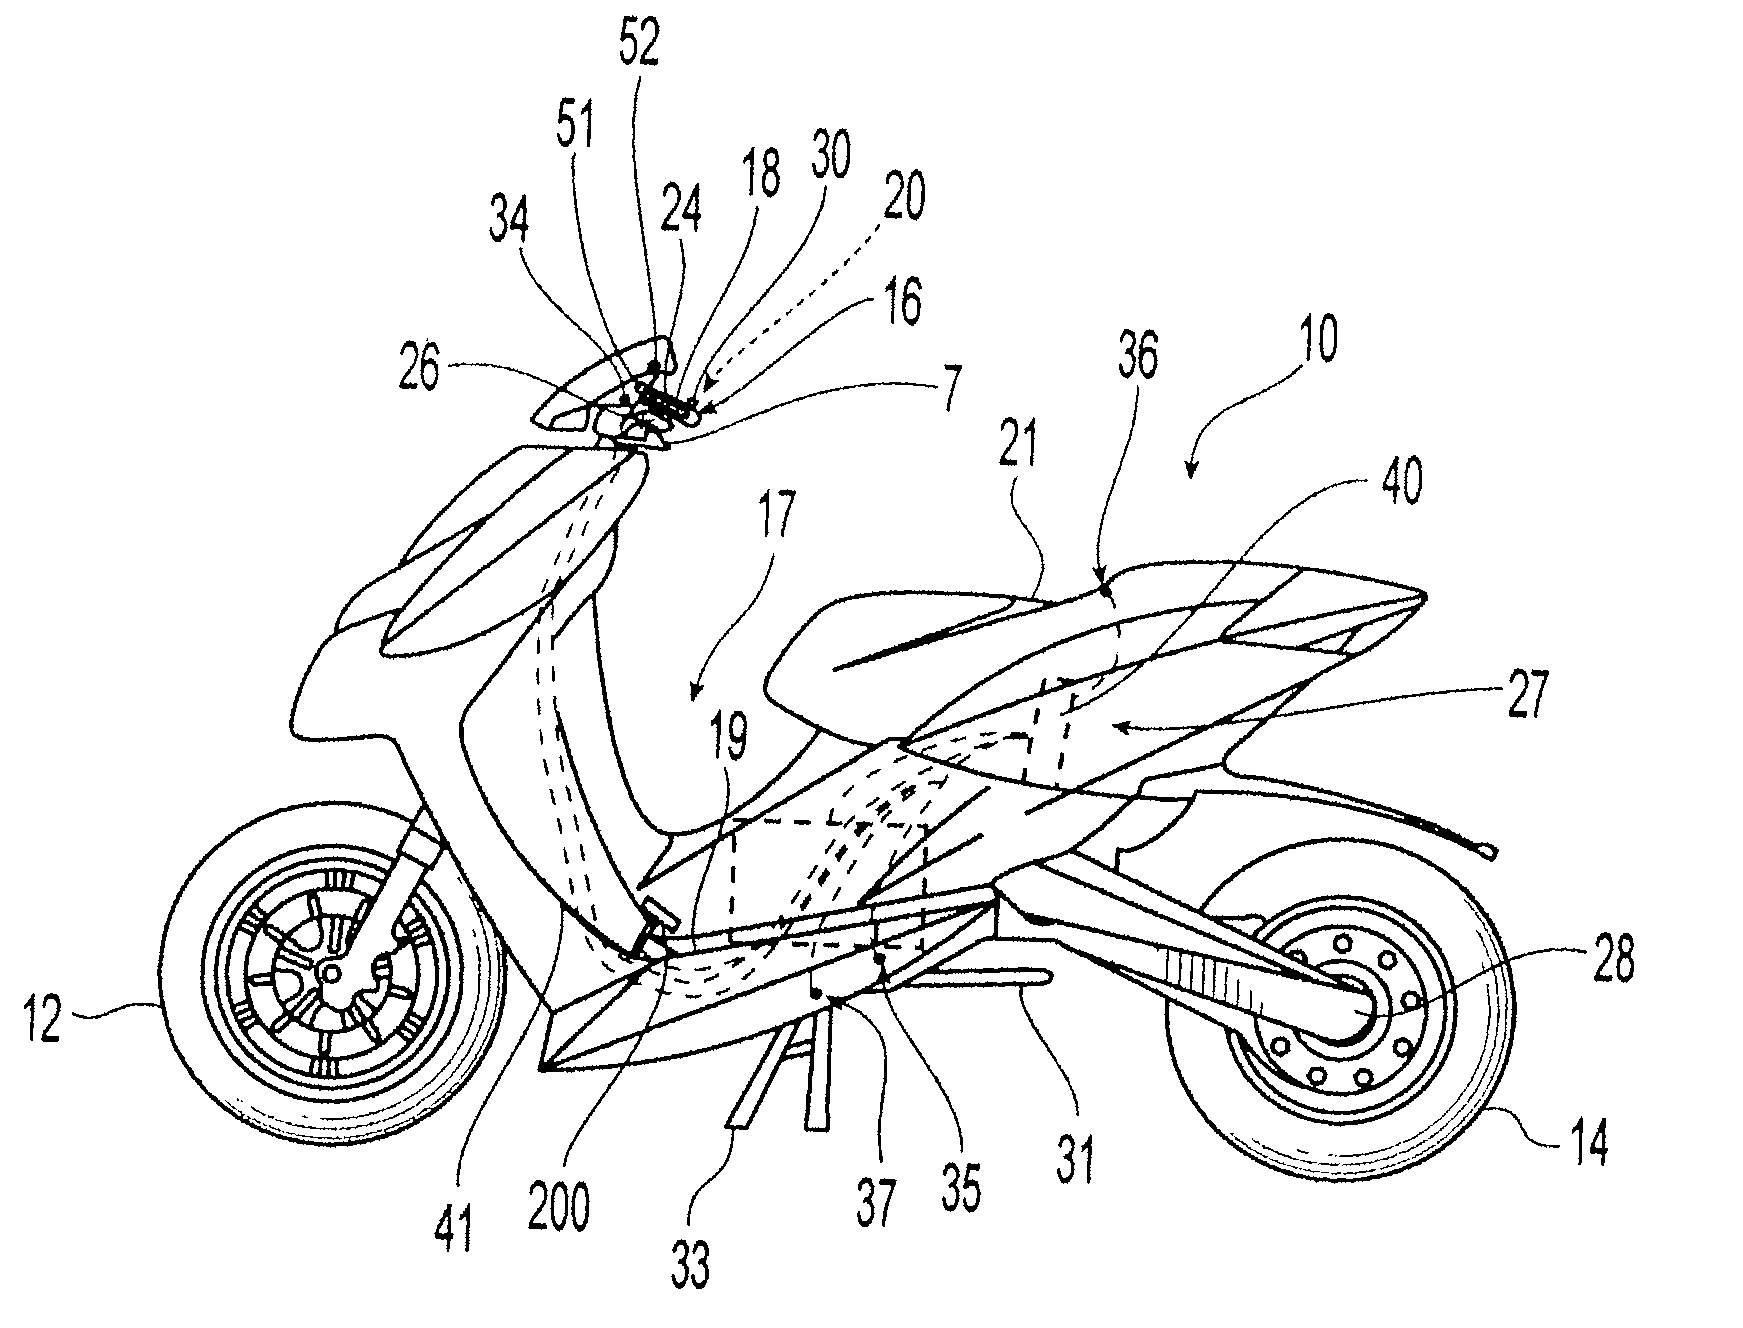 Vehicle propulsion system activation device